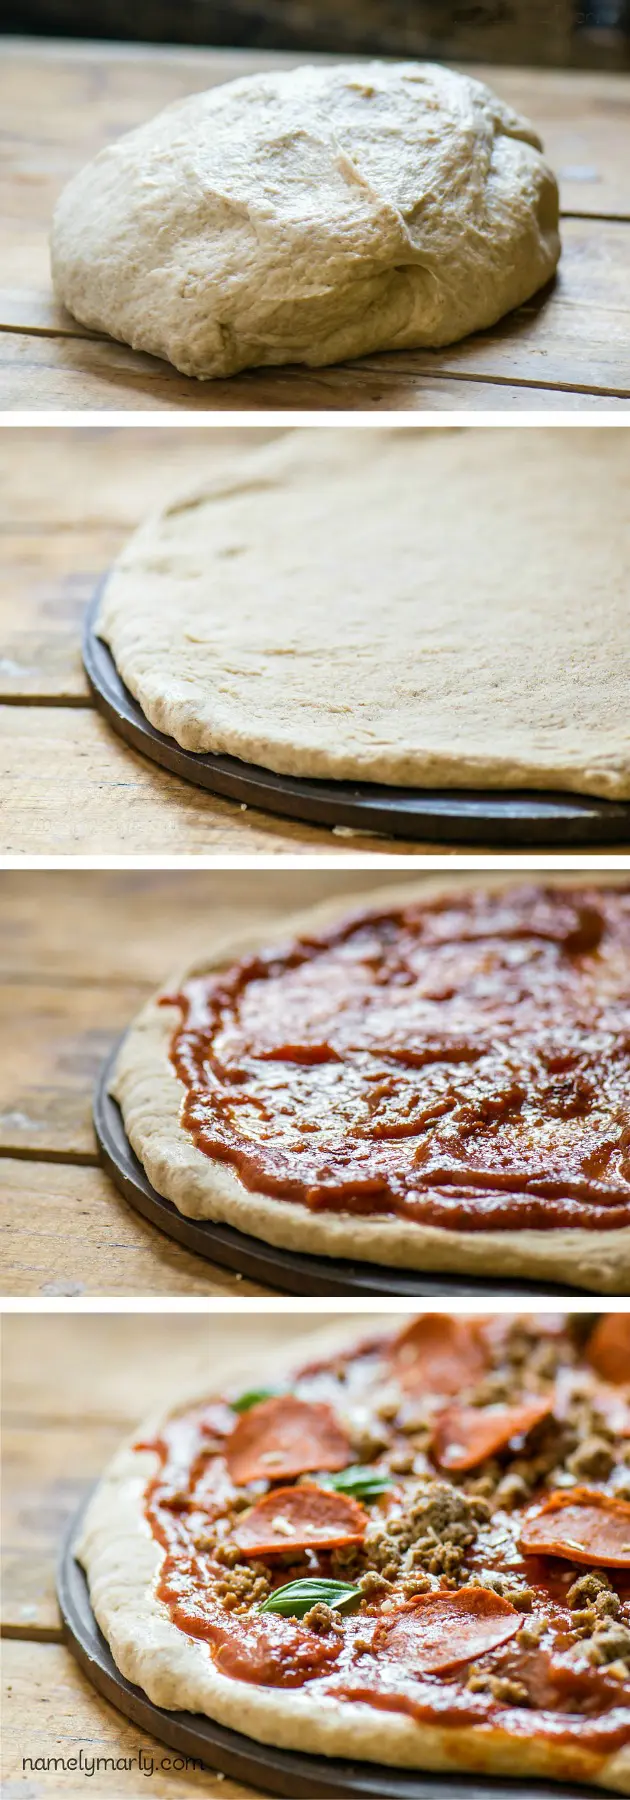 A collage of photos, the top shows the pizza dough ball, the middle shows the pizza dough rolled out onto a pizza stone. The next photo sows pizza sauce on the crust. The final shot shows the toppings on the pizza before it's baked.